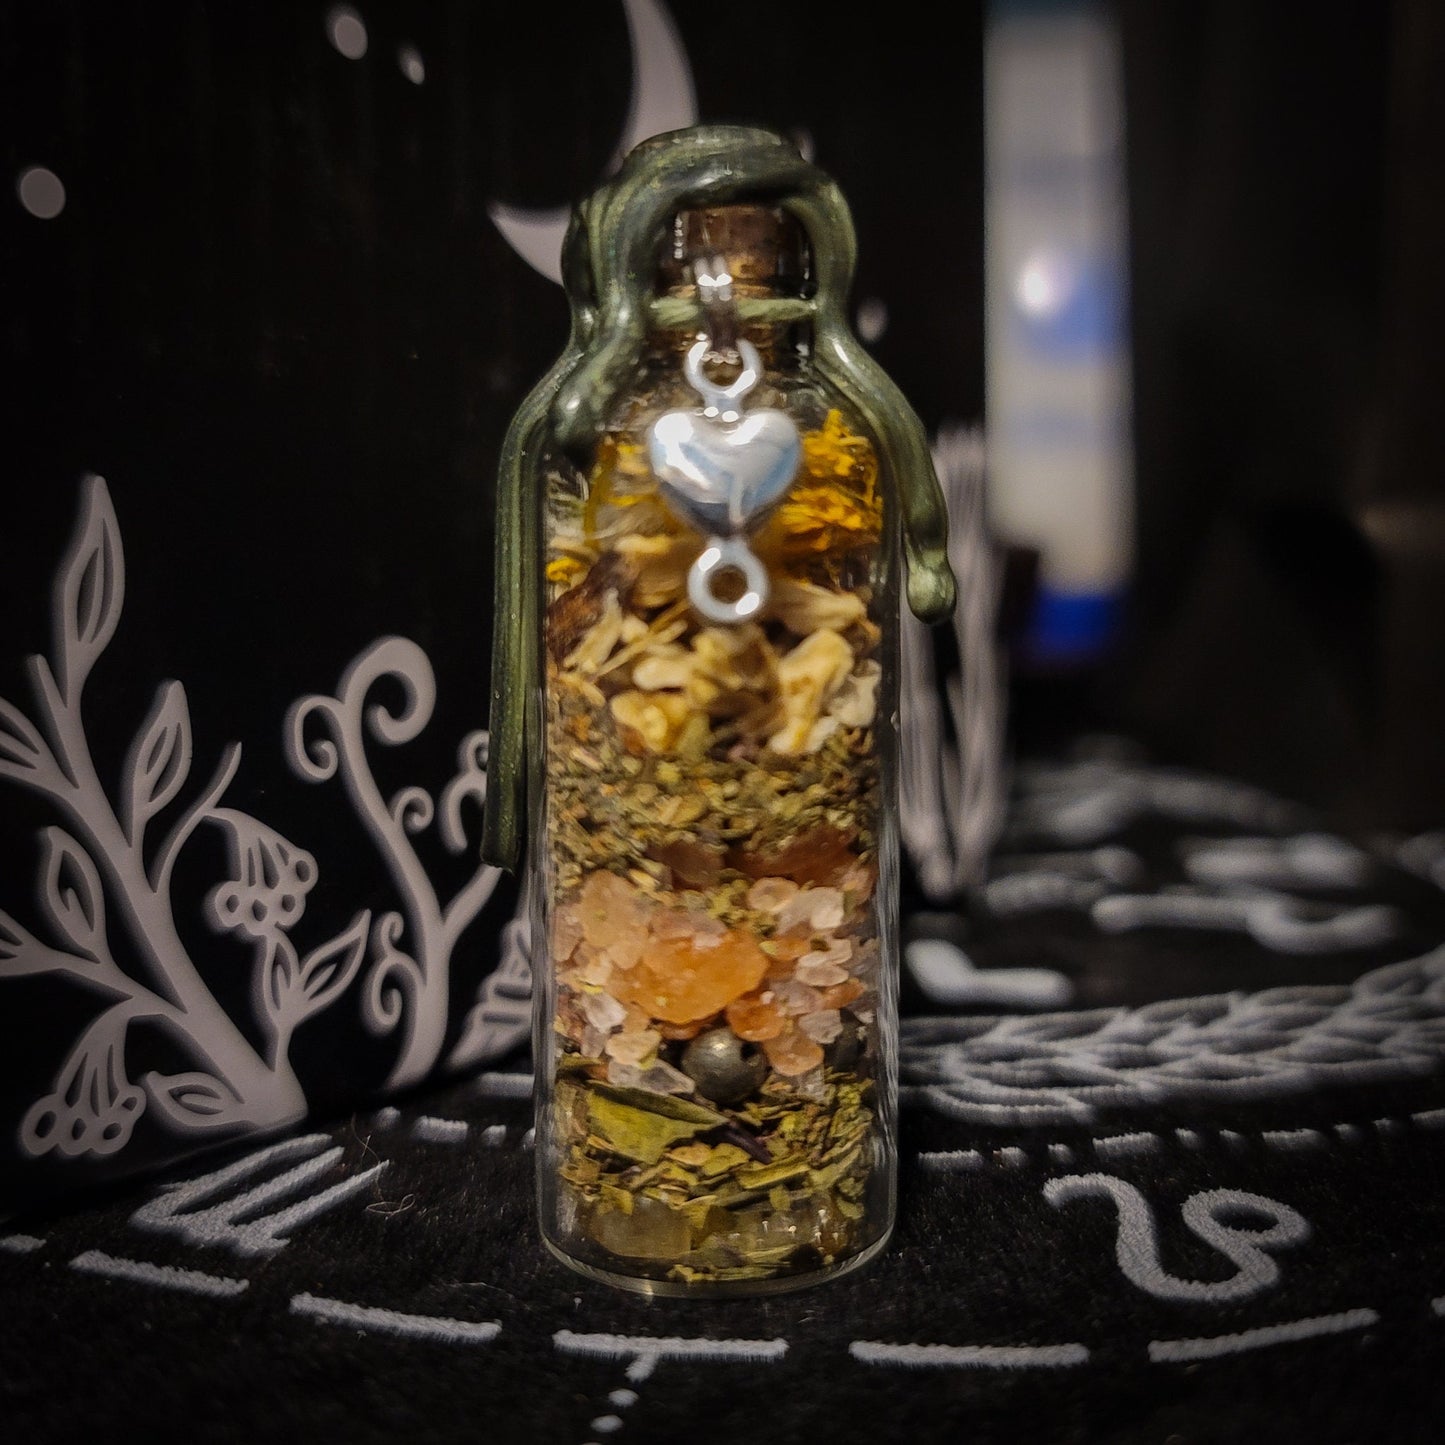 Spell Jar - Safe Travels/Good Luck - Witch Bottle for Traveling, Finding Fortune